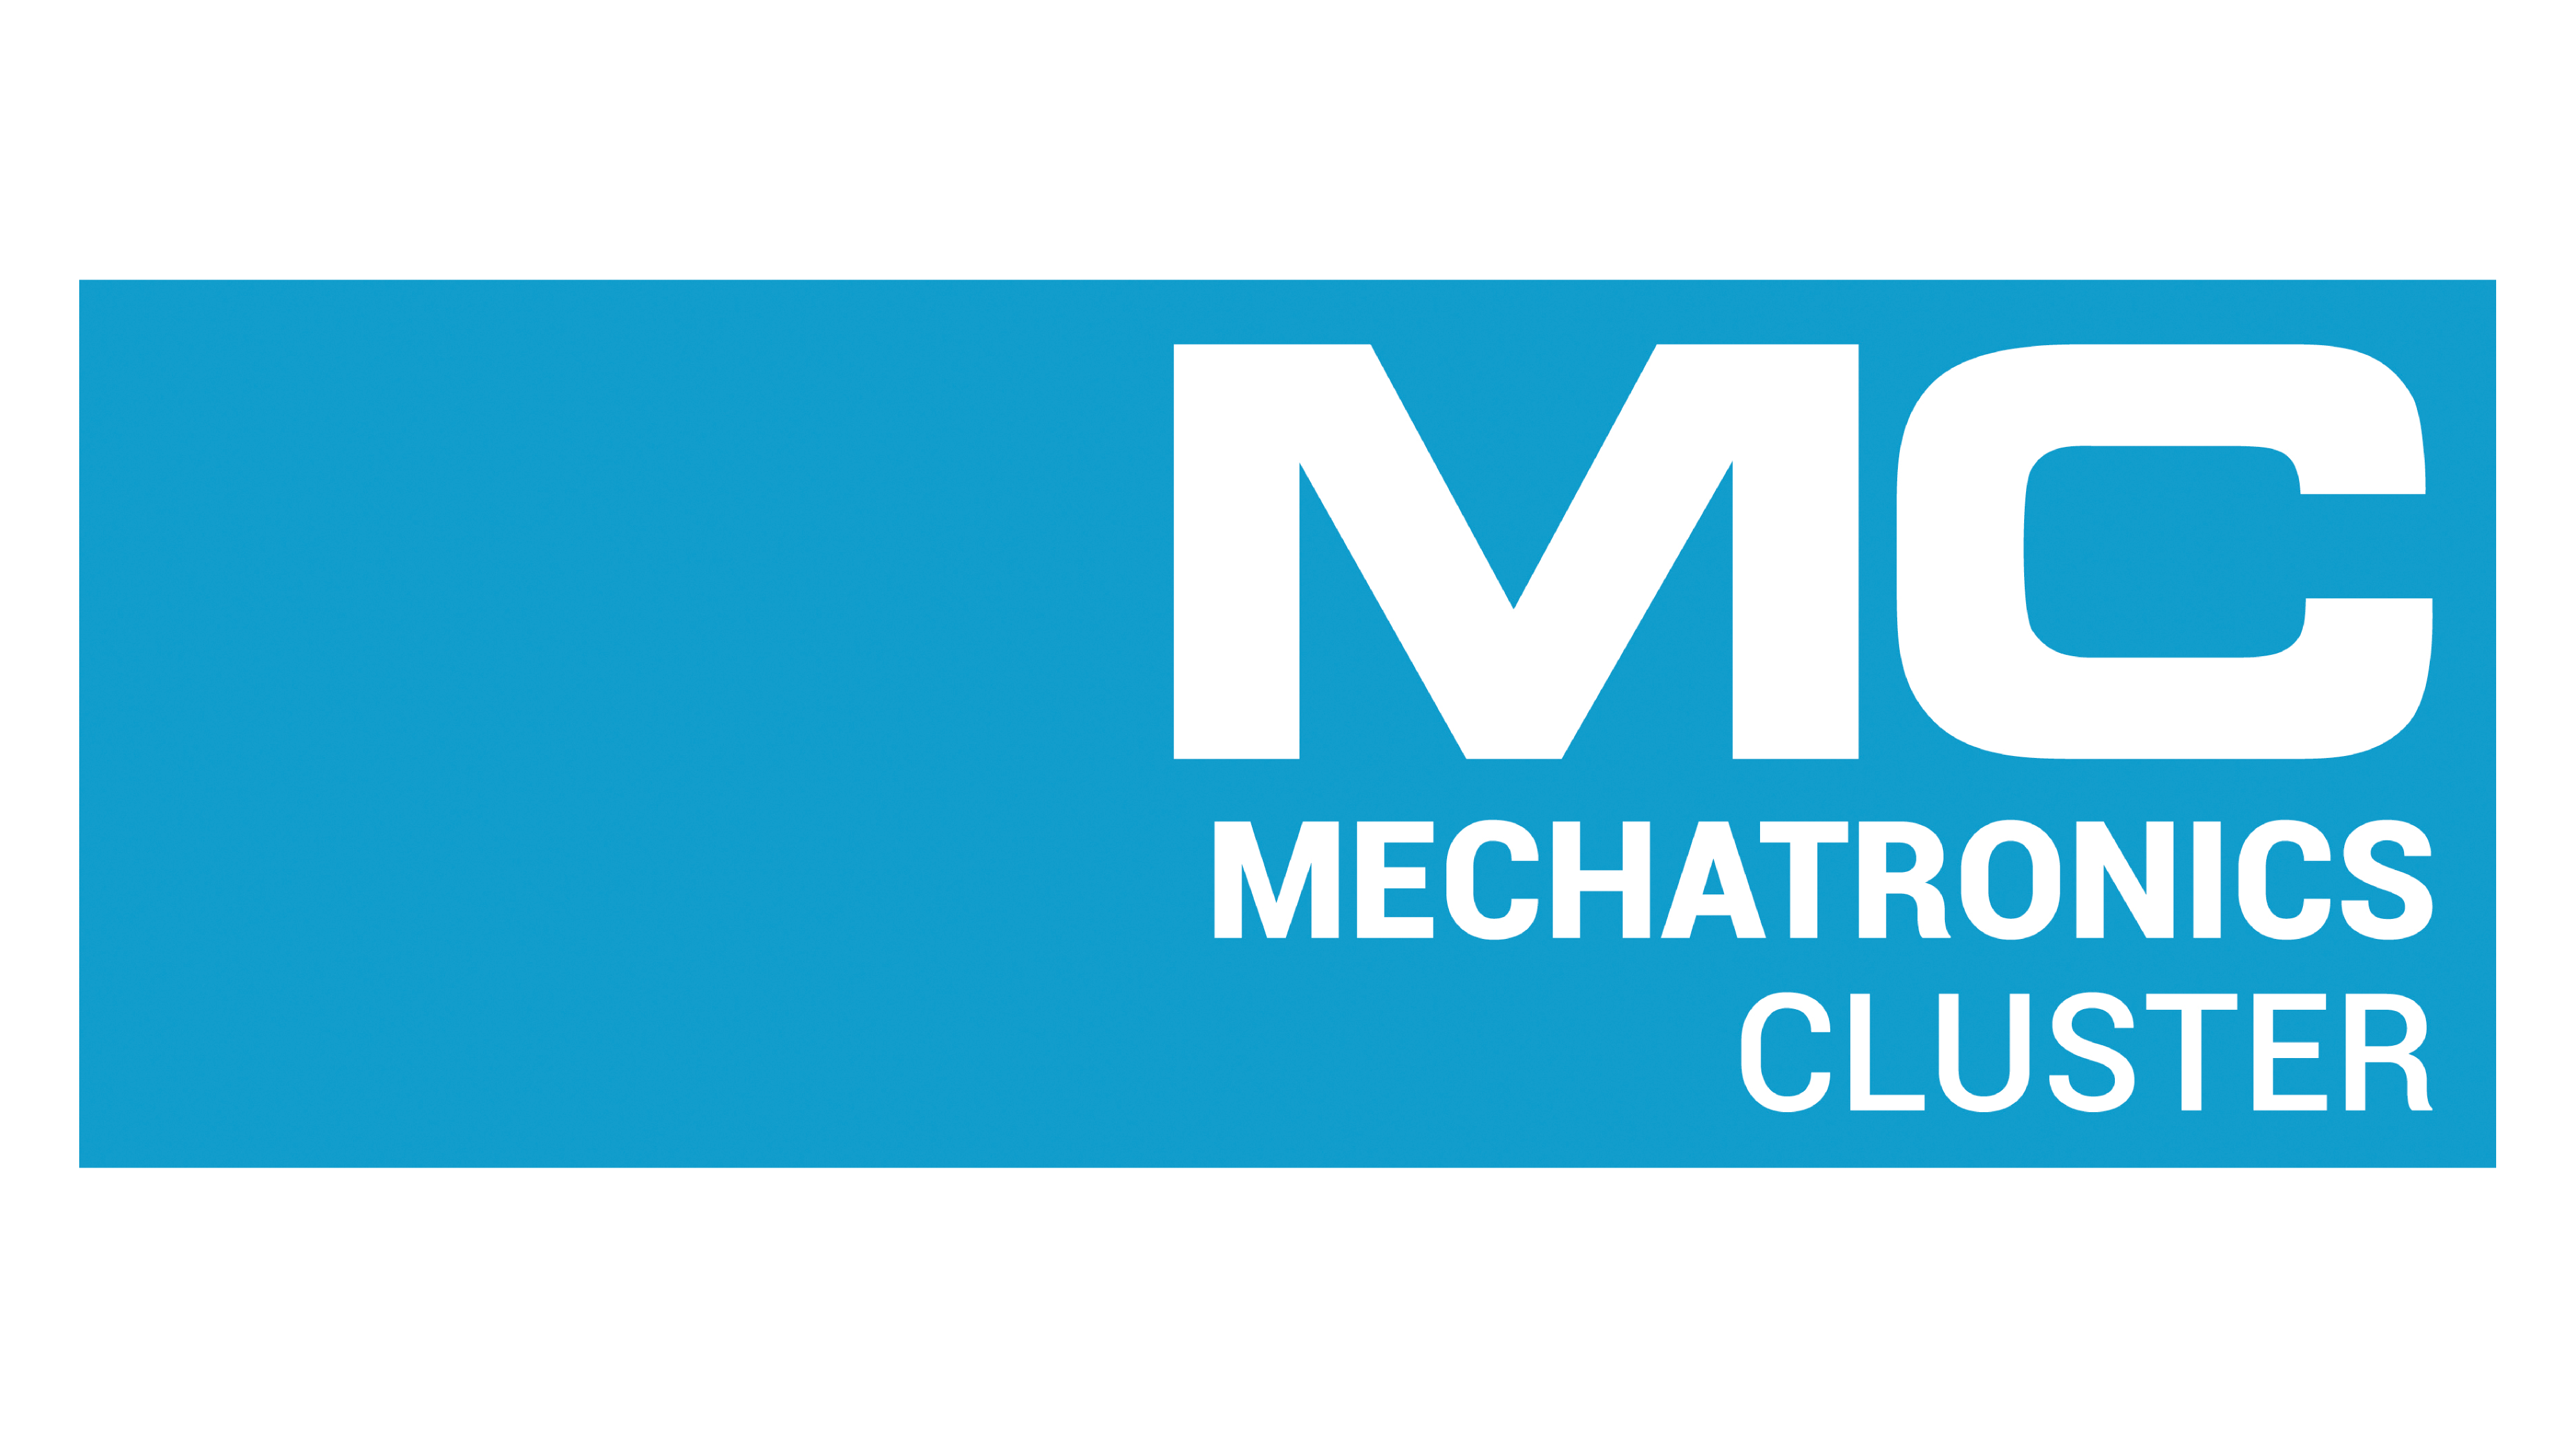 The logo of Mechatronik-Cluster in white letters on blue background.